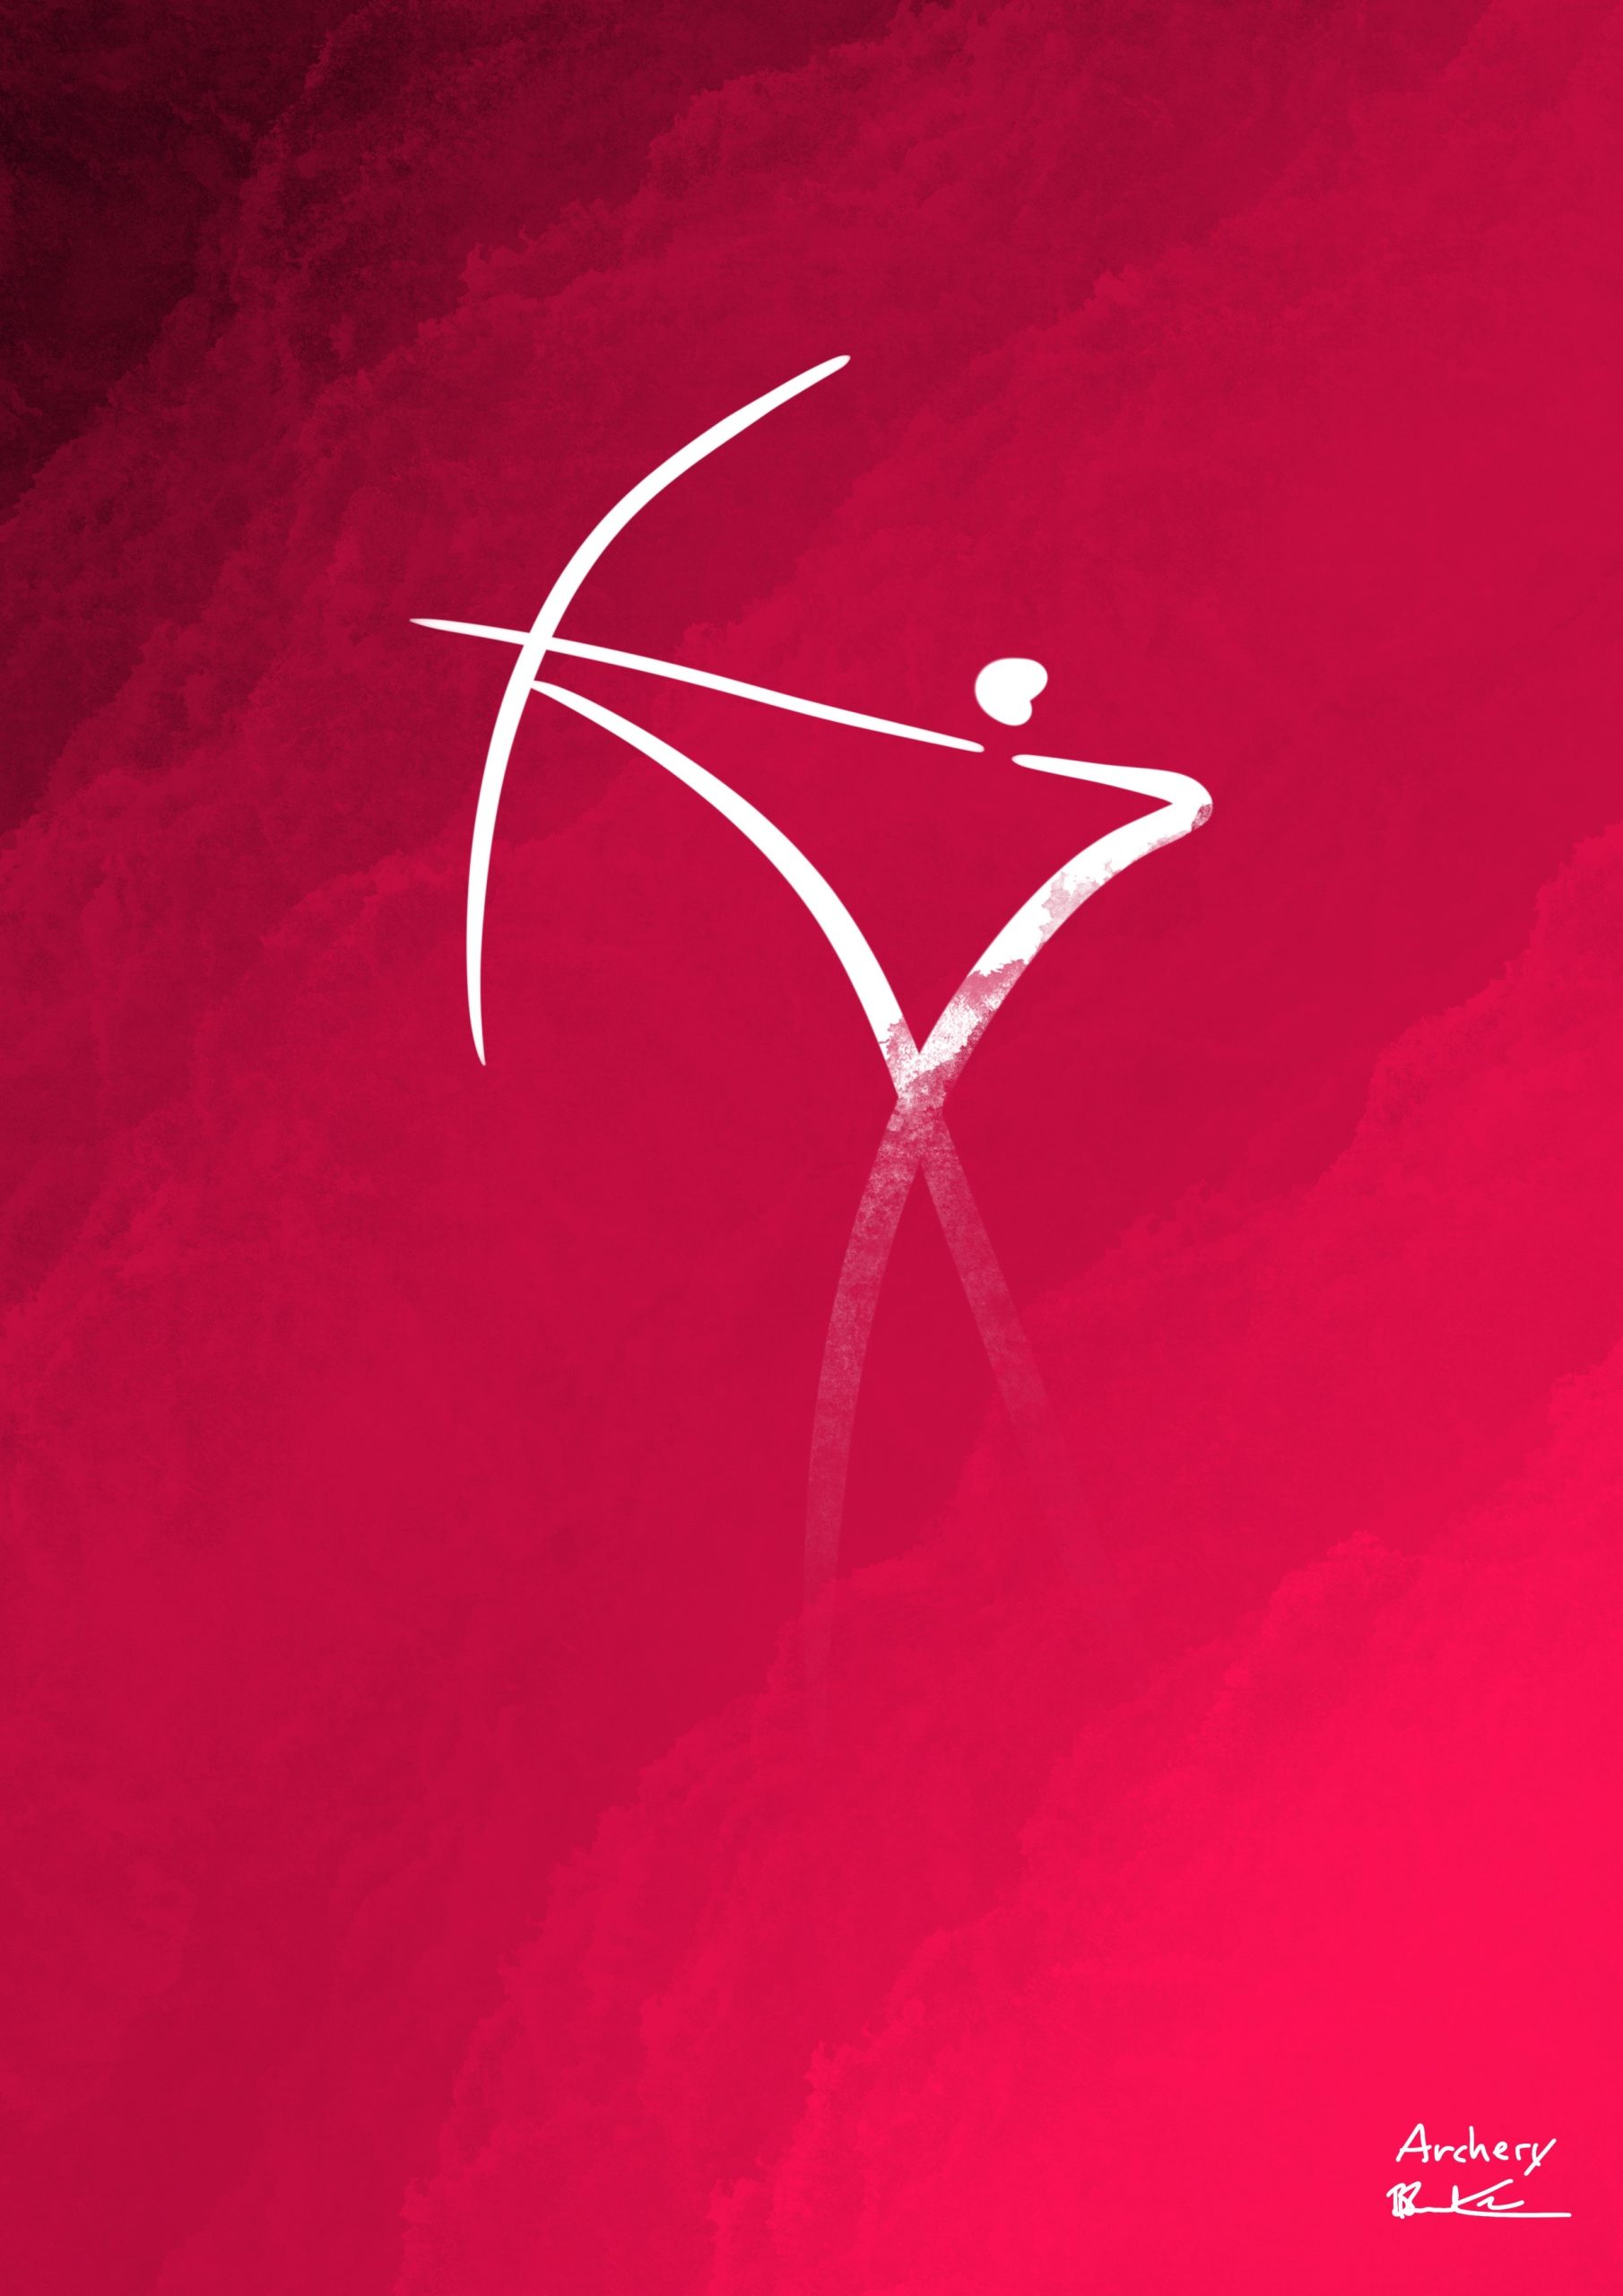 A minimalist linework design of an archer pulling back on his bow against a gradient red background.